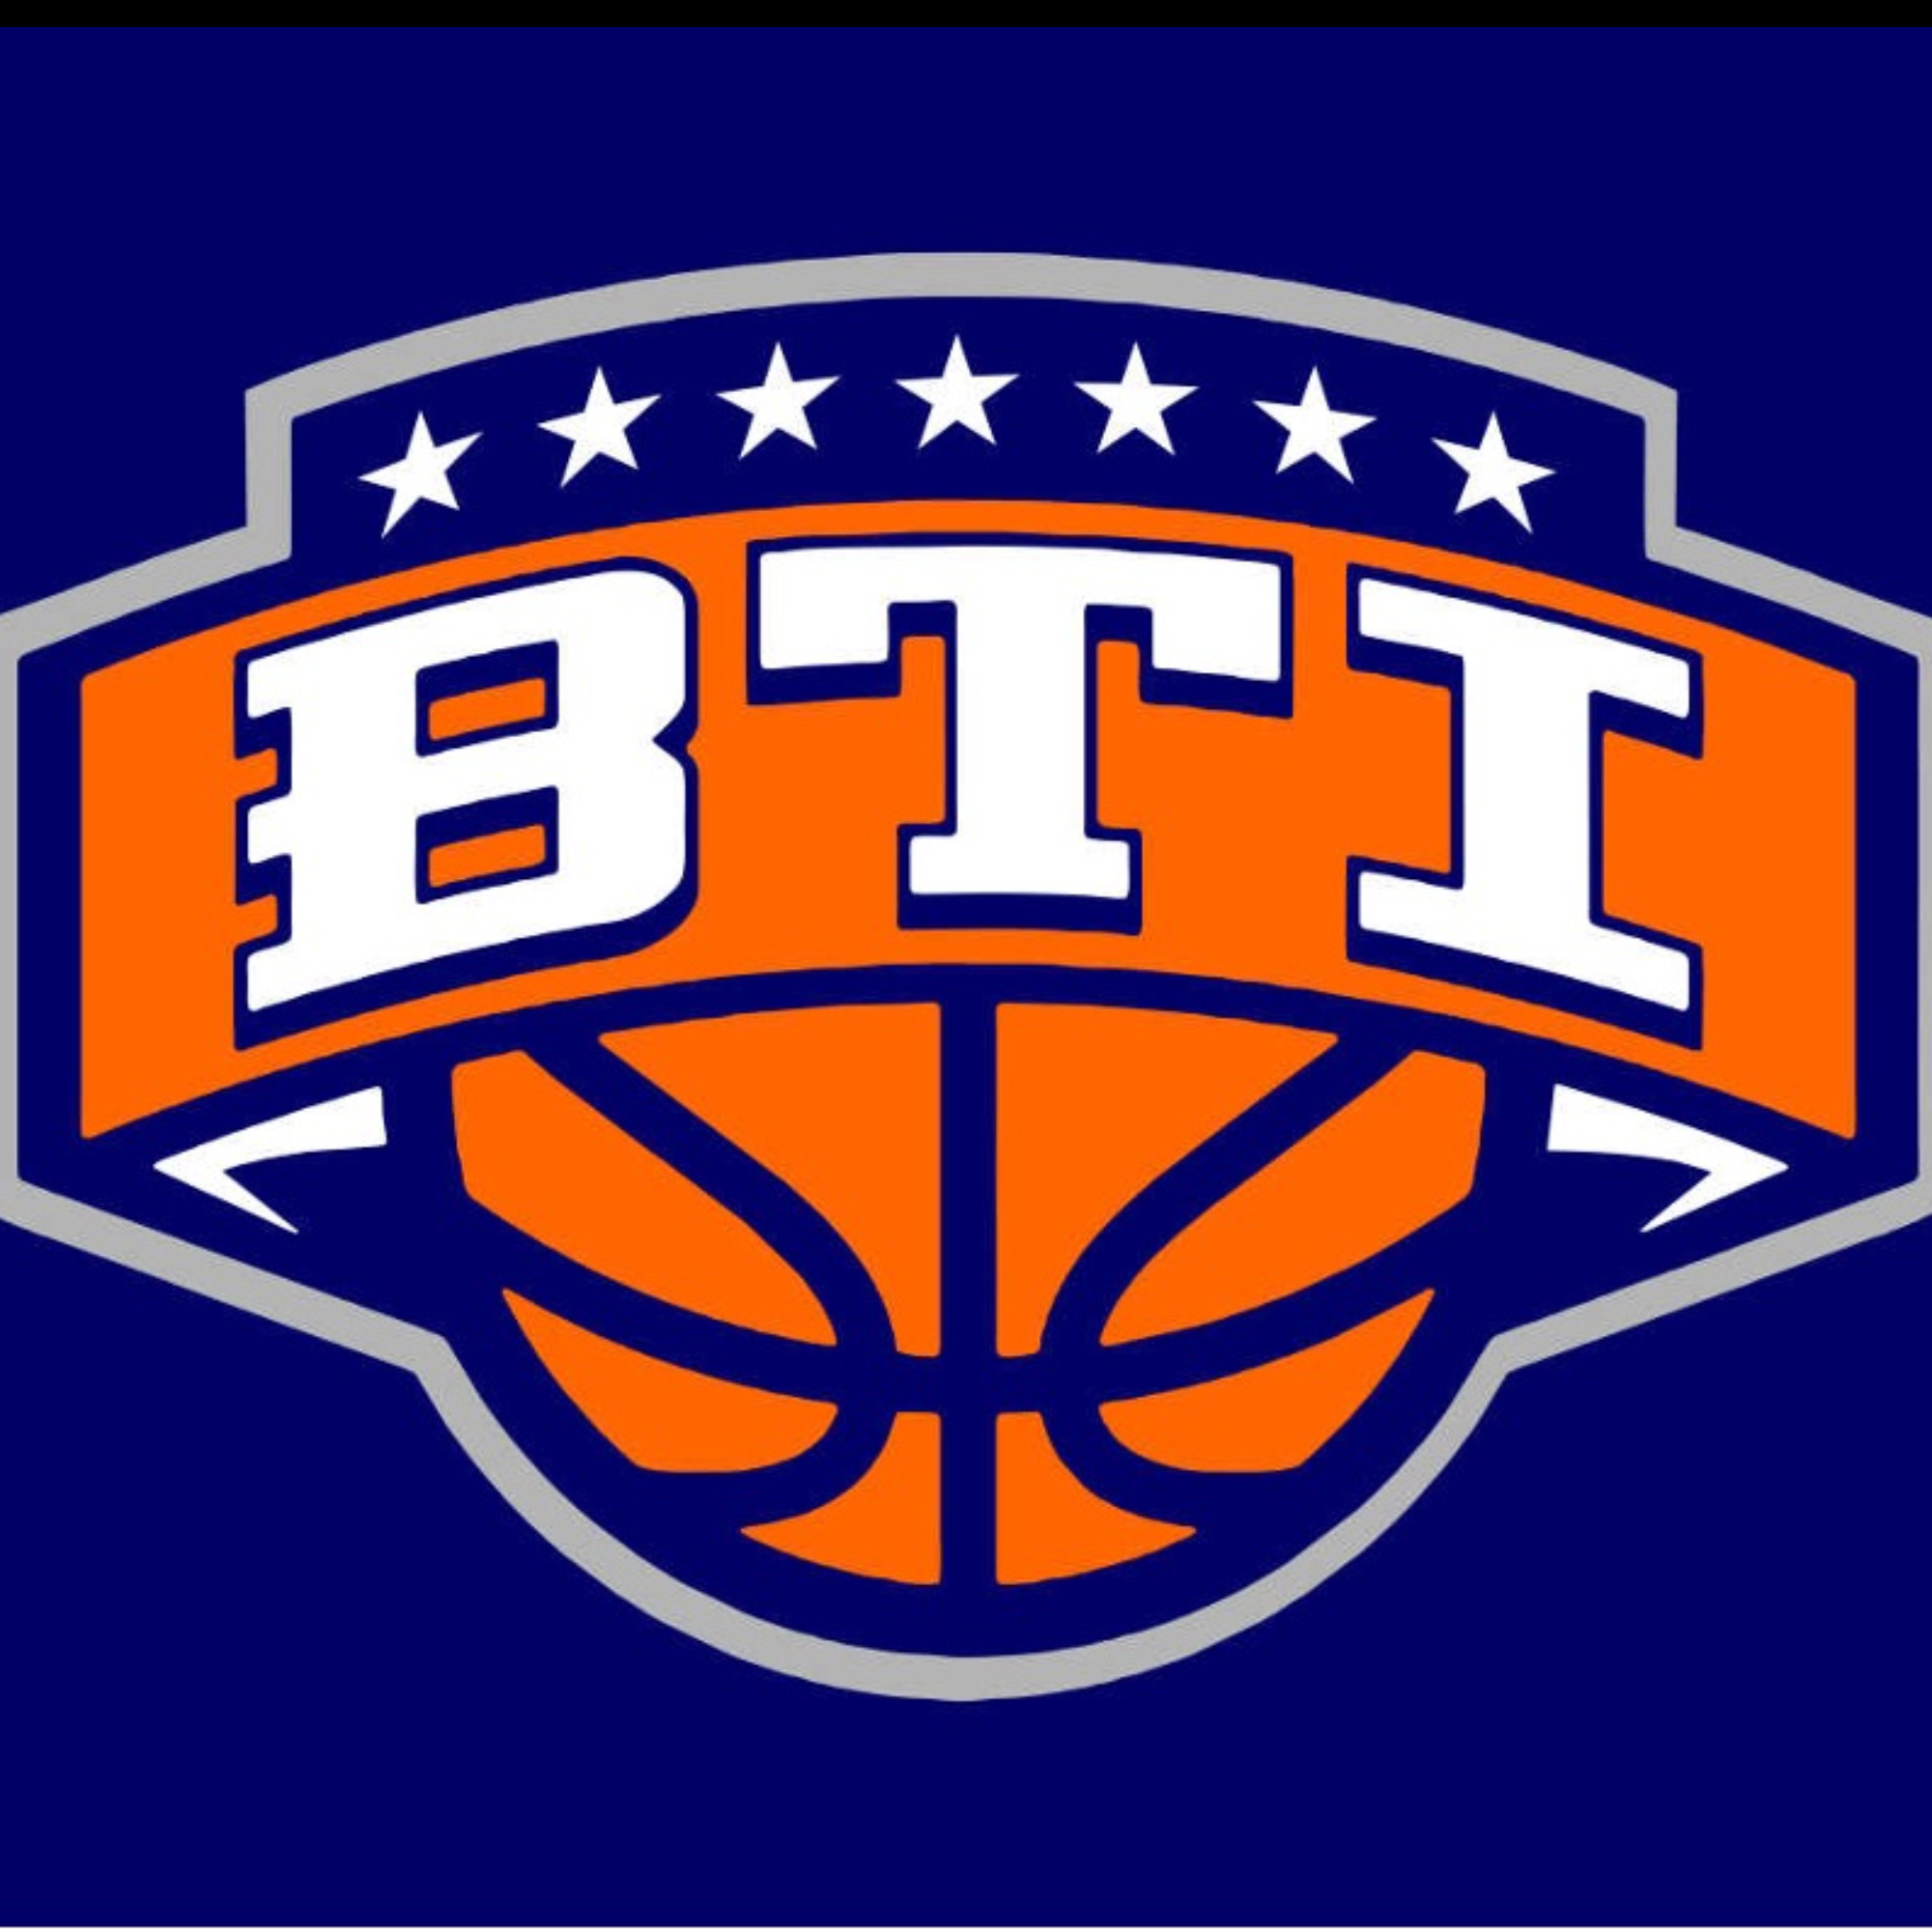 The official logo of BTI Hoops